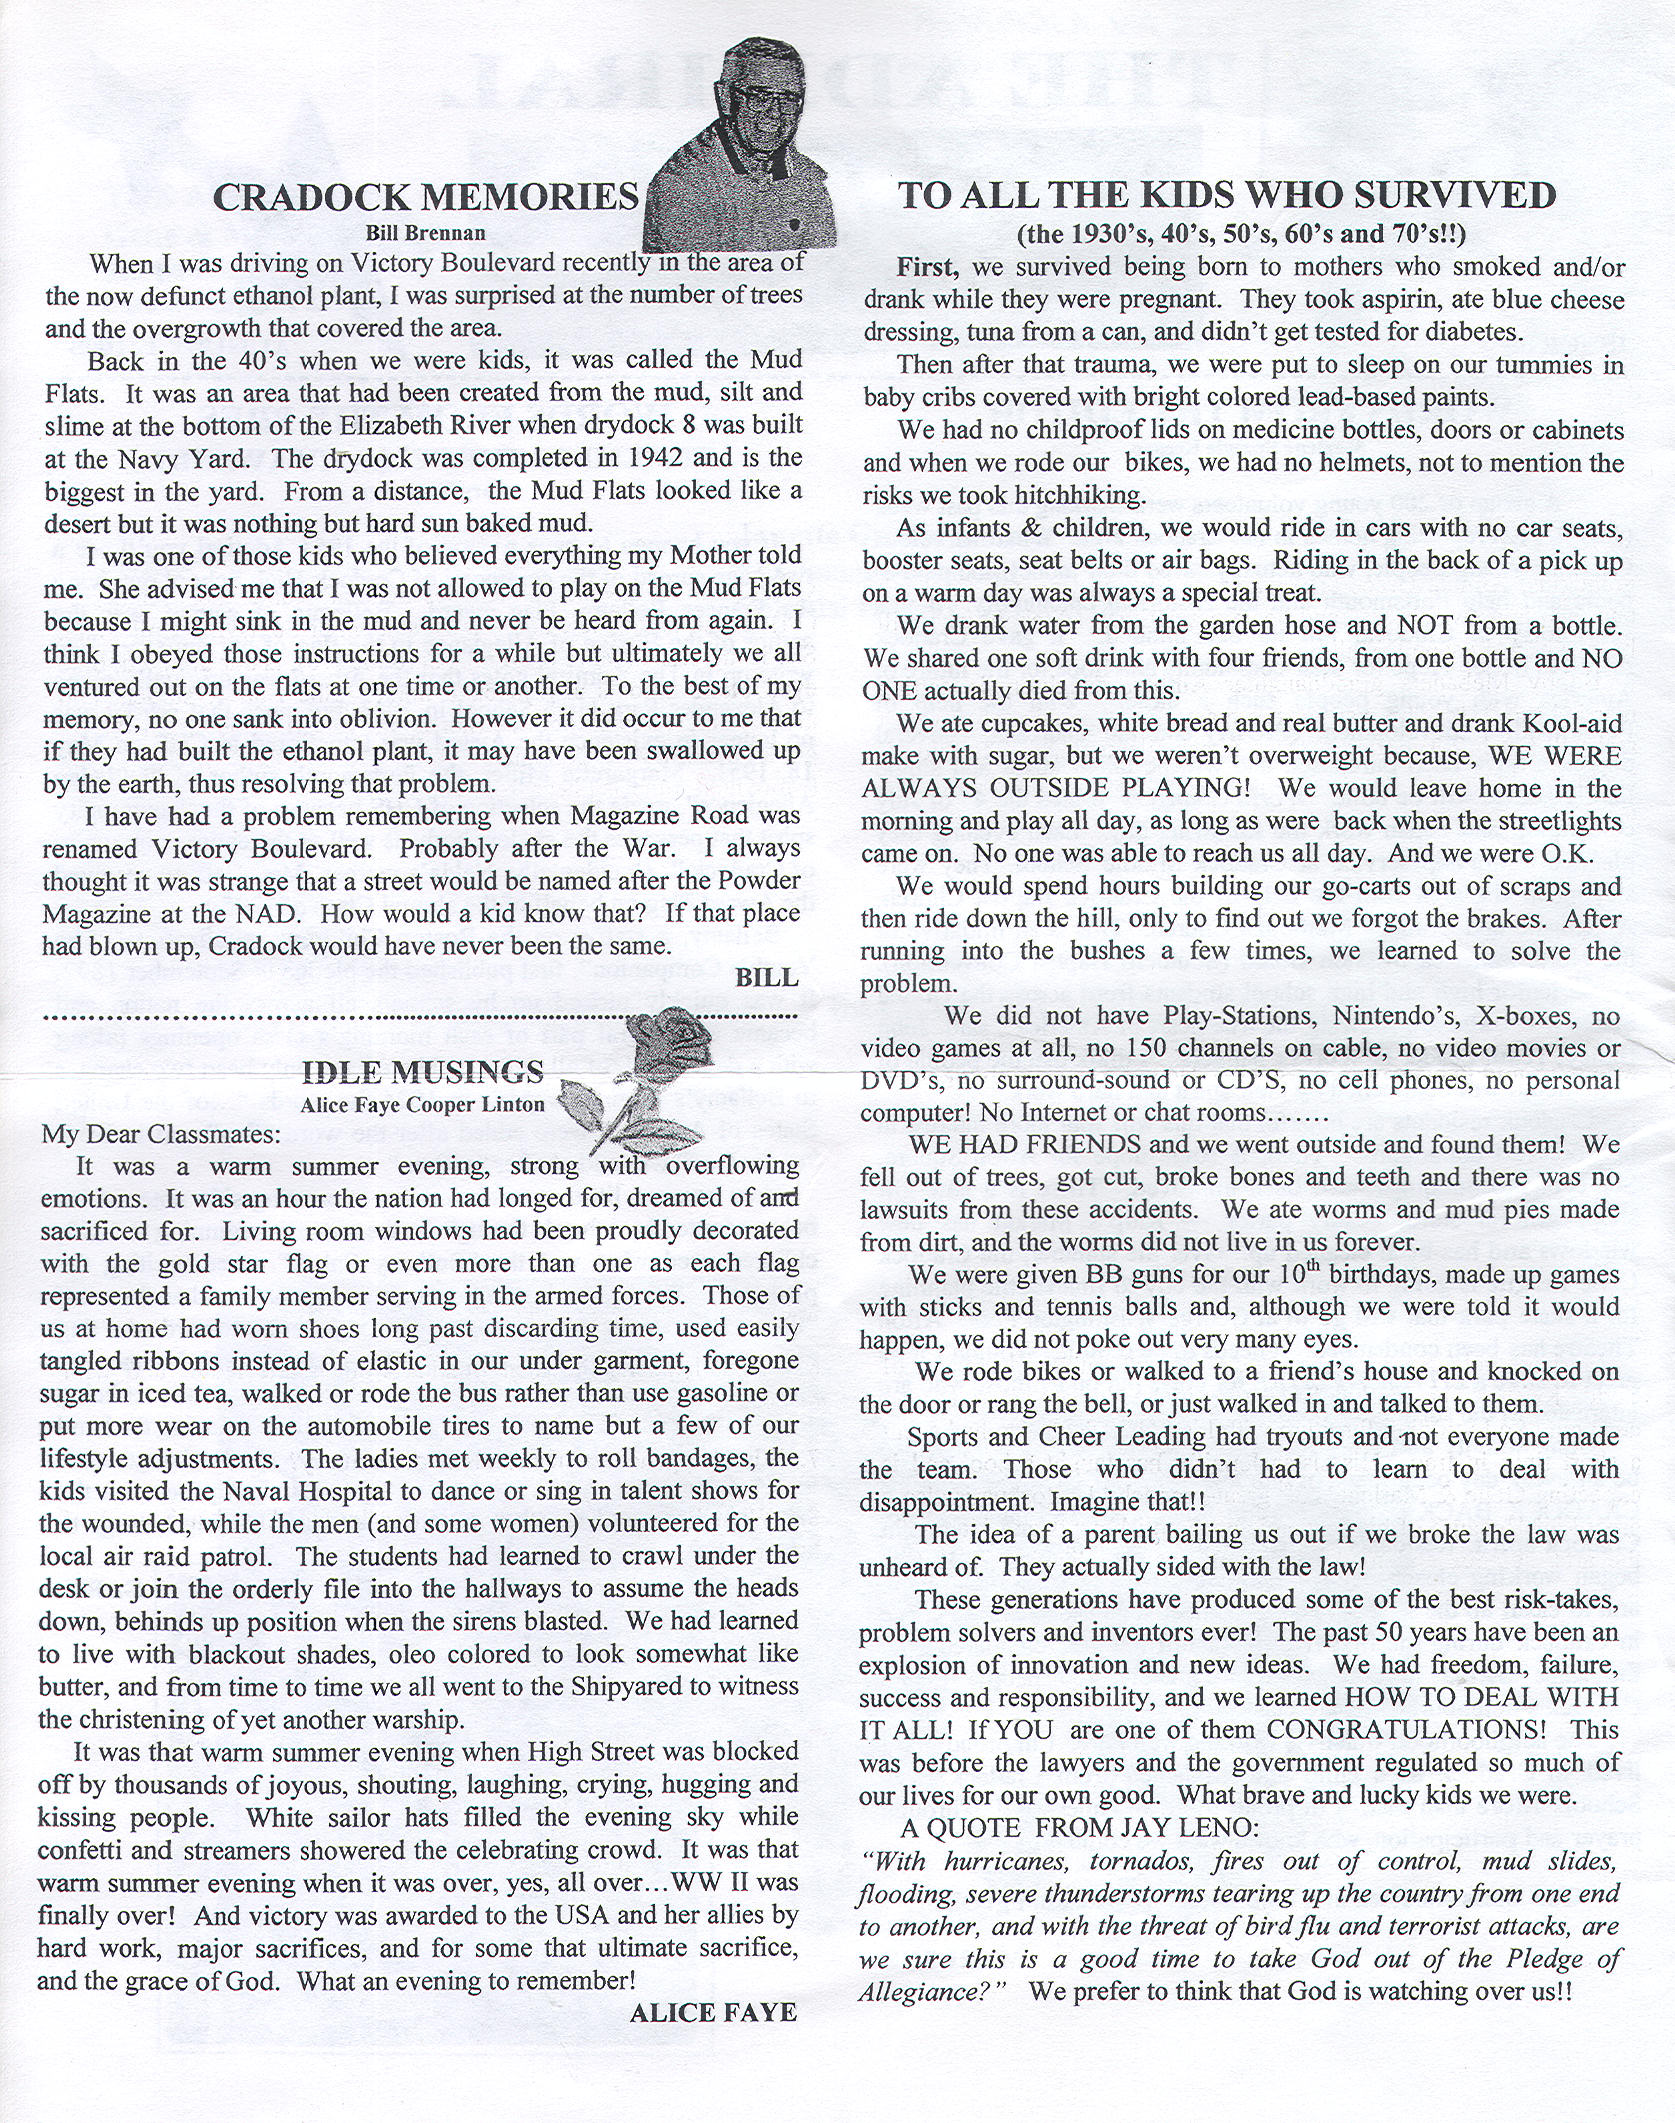 The Admiral - August 2008 - pg. 2